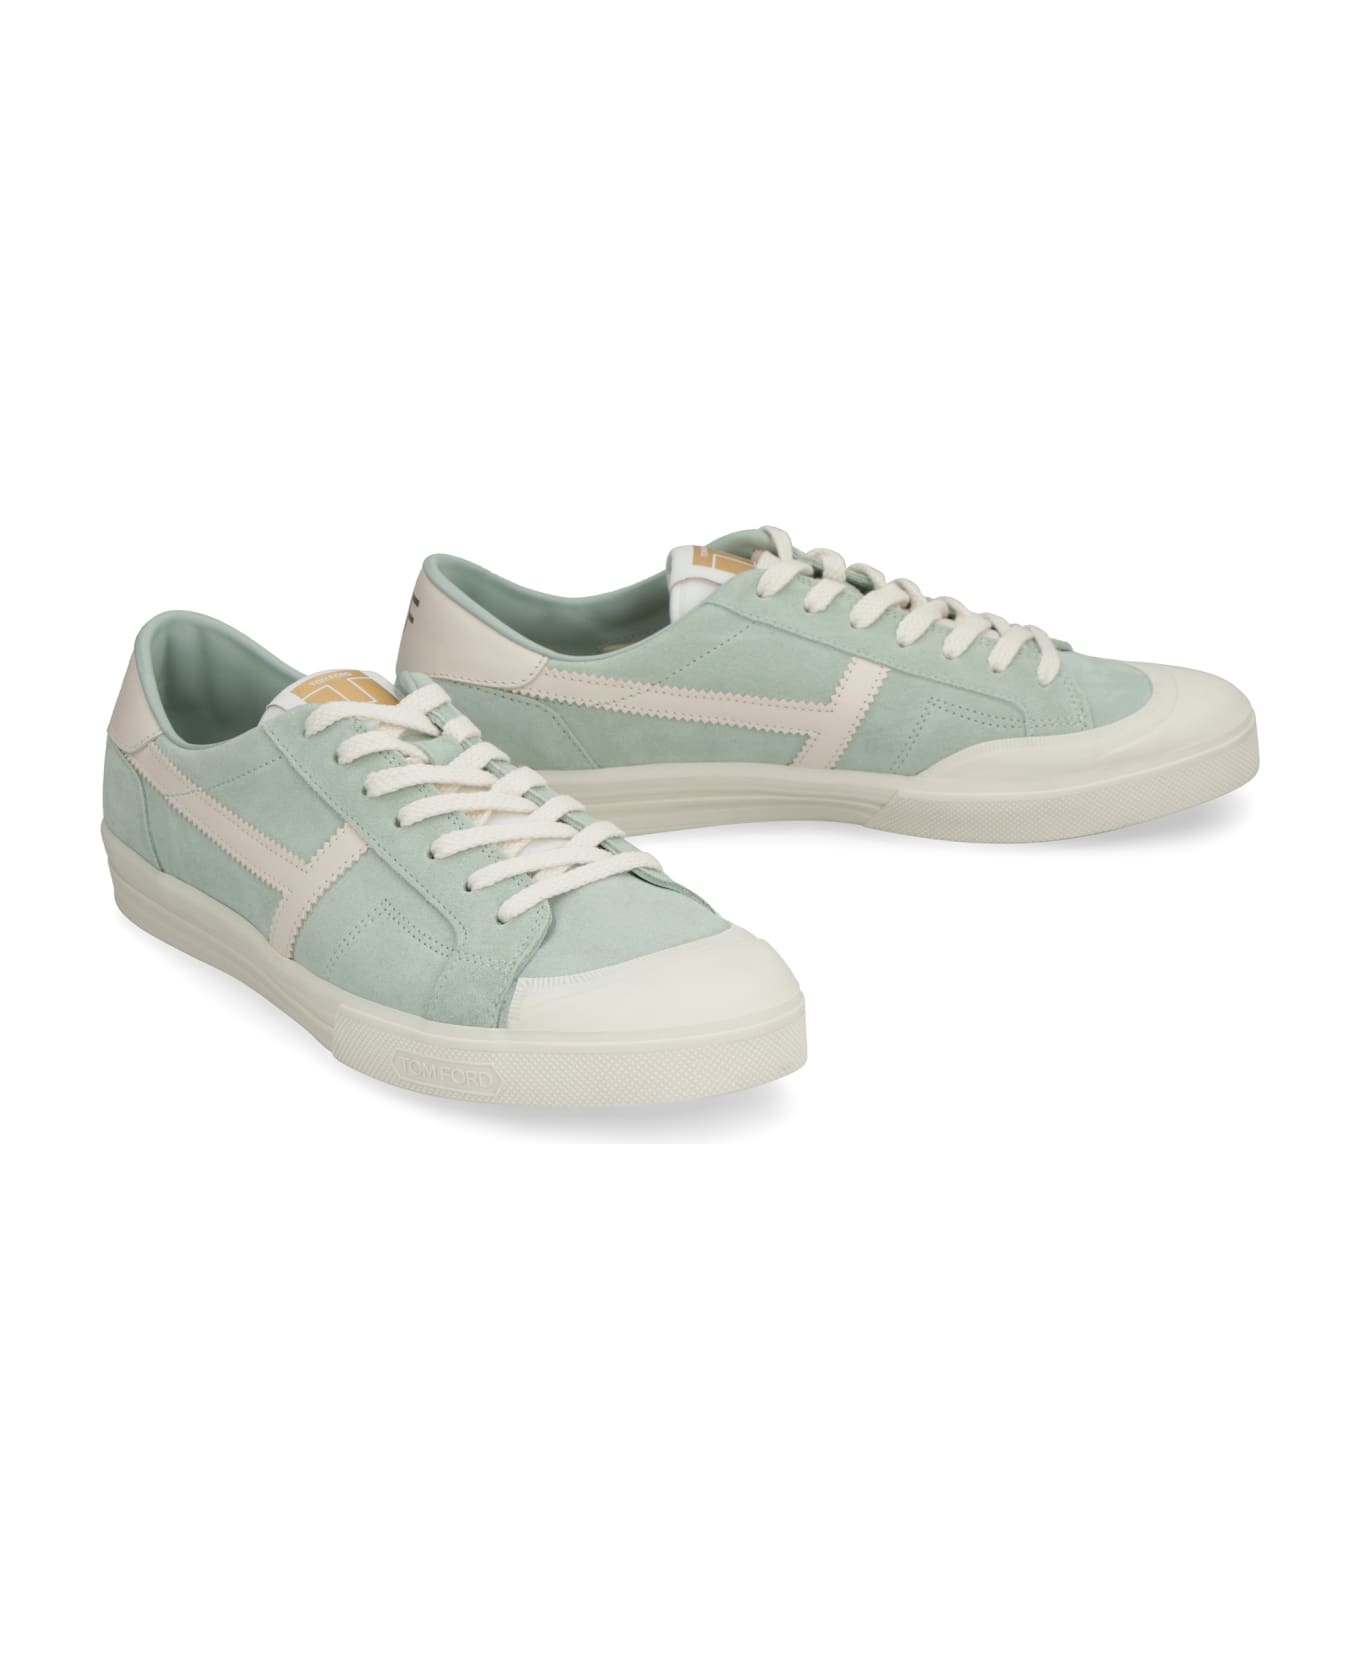 Tom Ford Jarvis Suede Sneakers - green スニーカー